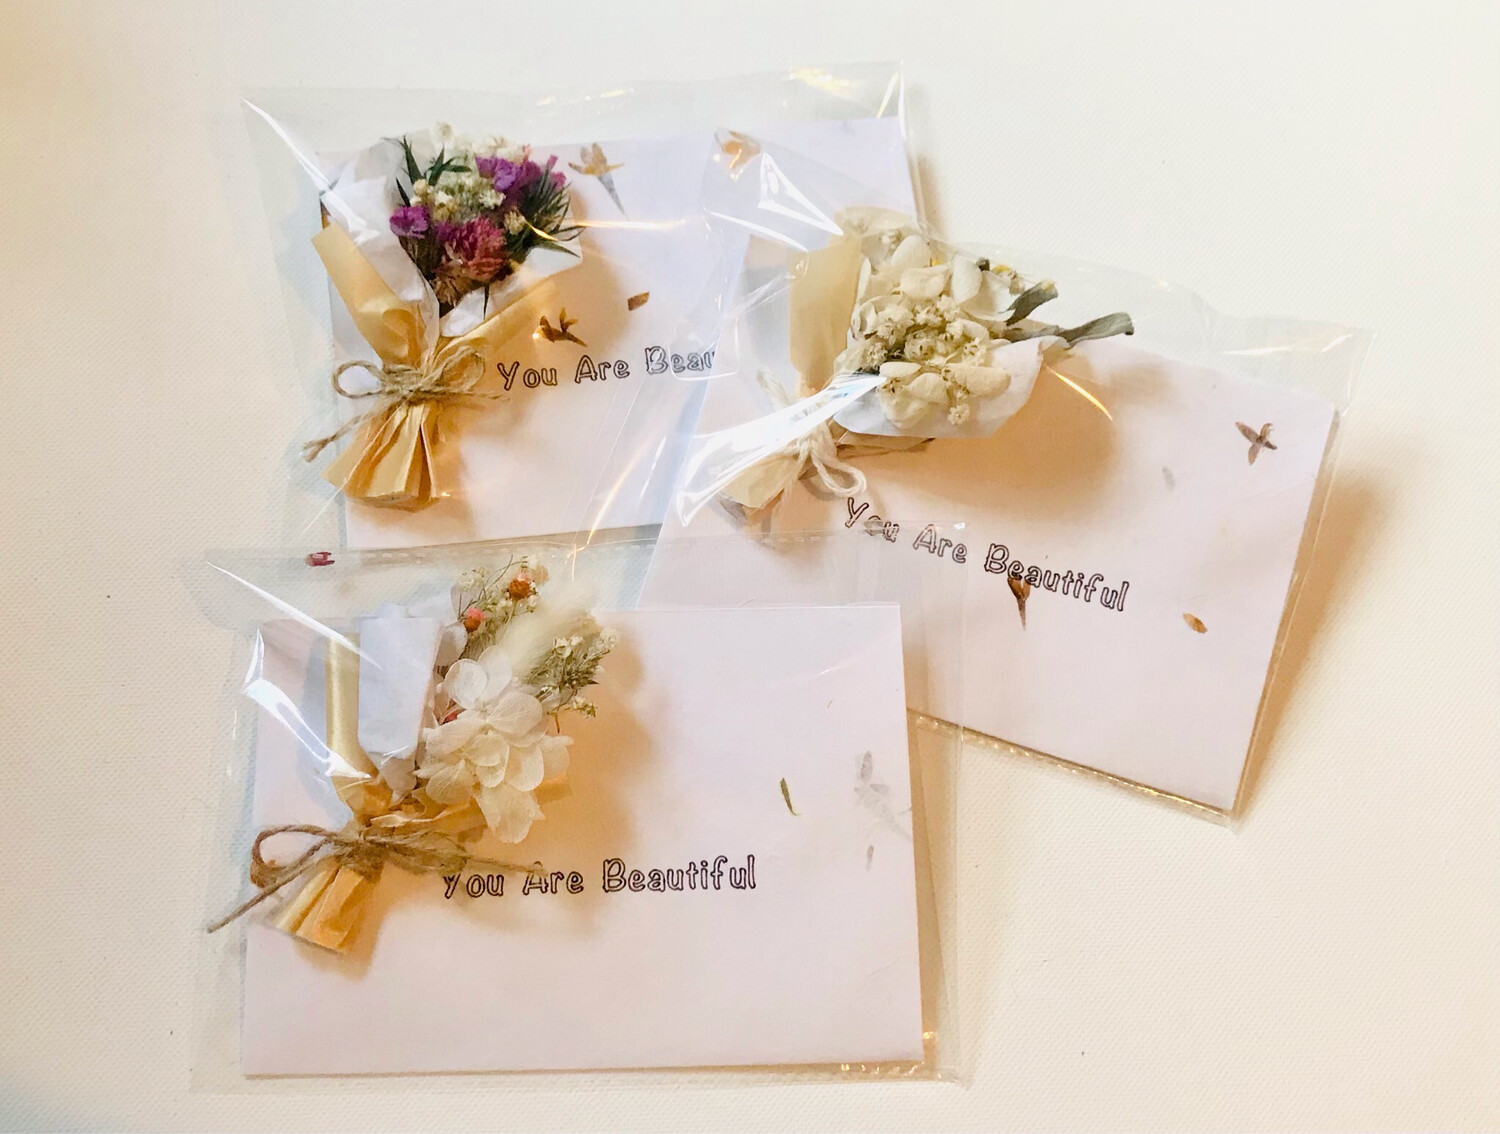 HANDMADE CARDS WITH MINI BOUQUET DRIED FLOWERS